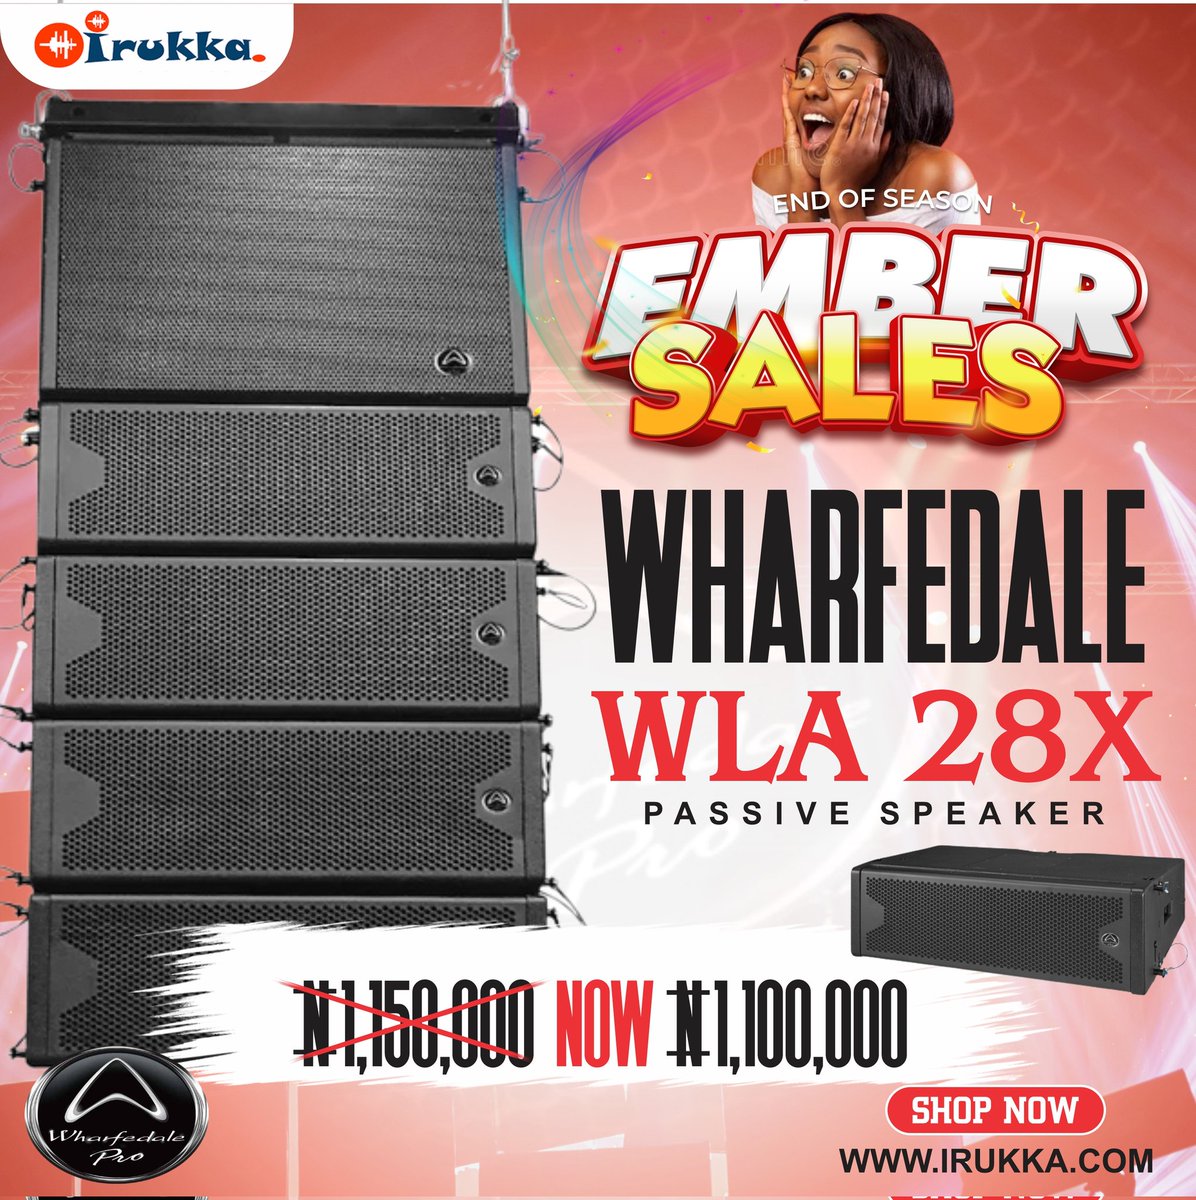 EMBER SALES! it's here guys 💃💃
#Wharfedalepro #WLA28X   #performance, and a must-hear system!

With just 1,100,000 you can own a WLA28X passive speaker #linearray

Normal price: #1,150,000
Sales price: #1,100,000

Grab it fast! 🔥

For purchase visit irukka.com